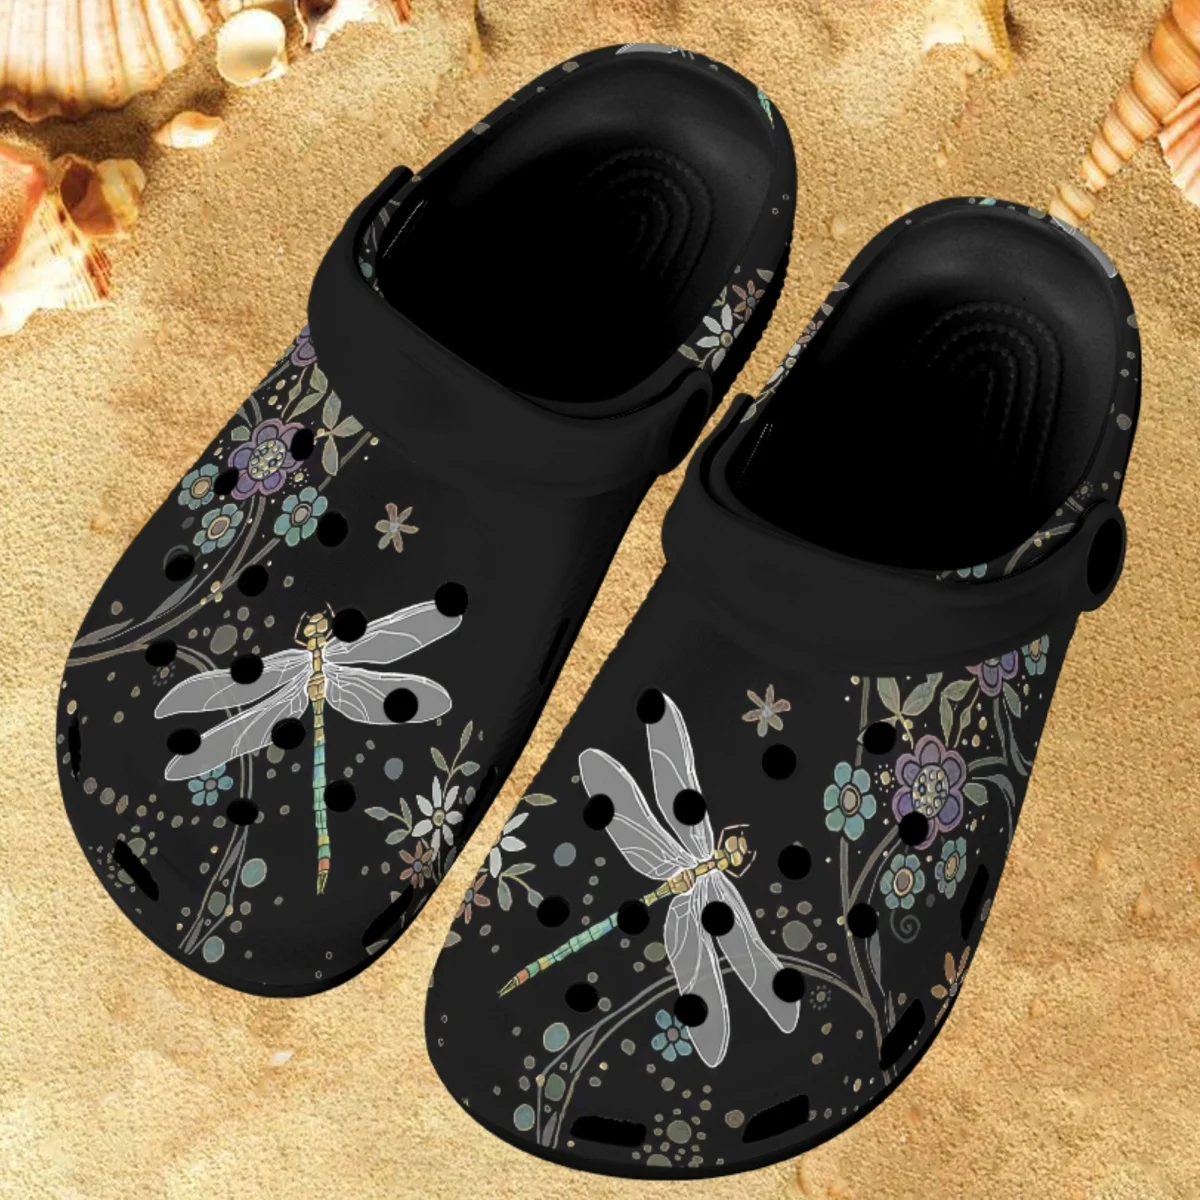 

2023 Fashion Dragonfly Print Women Clogs Sandals Summer Flat Garden Shoes Lightweight Breathable Beach Slippers Sandals Couples